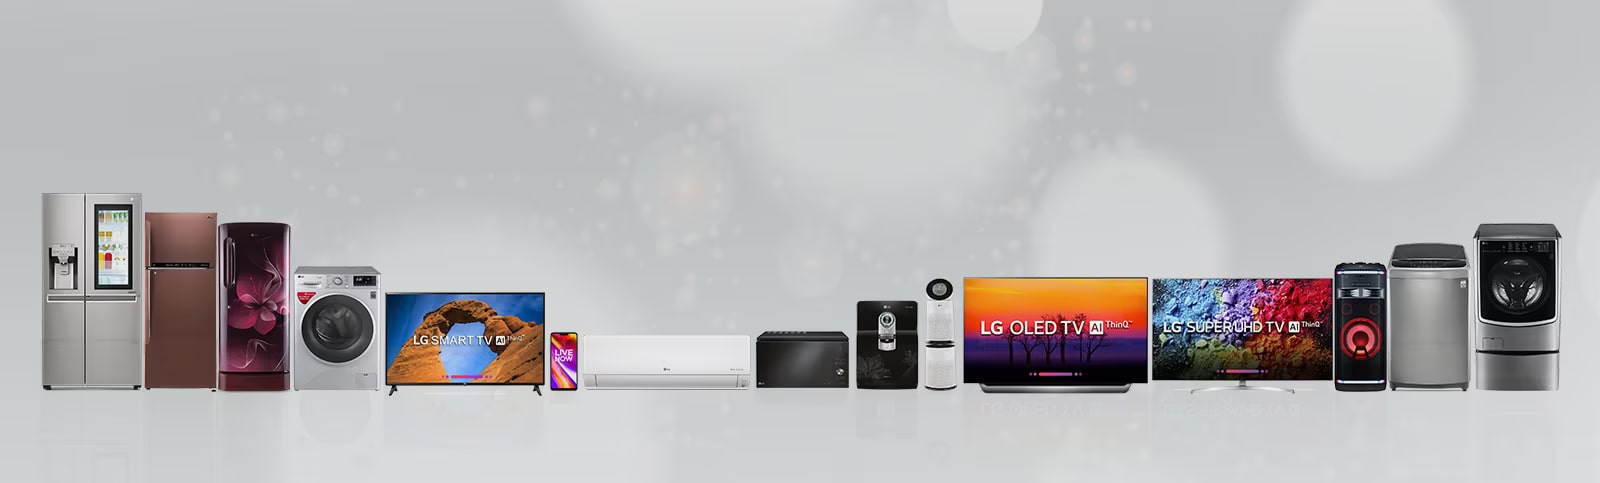 lg home entertainment offers